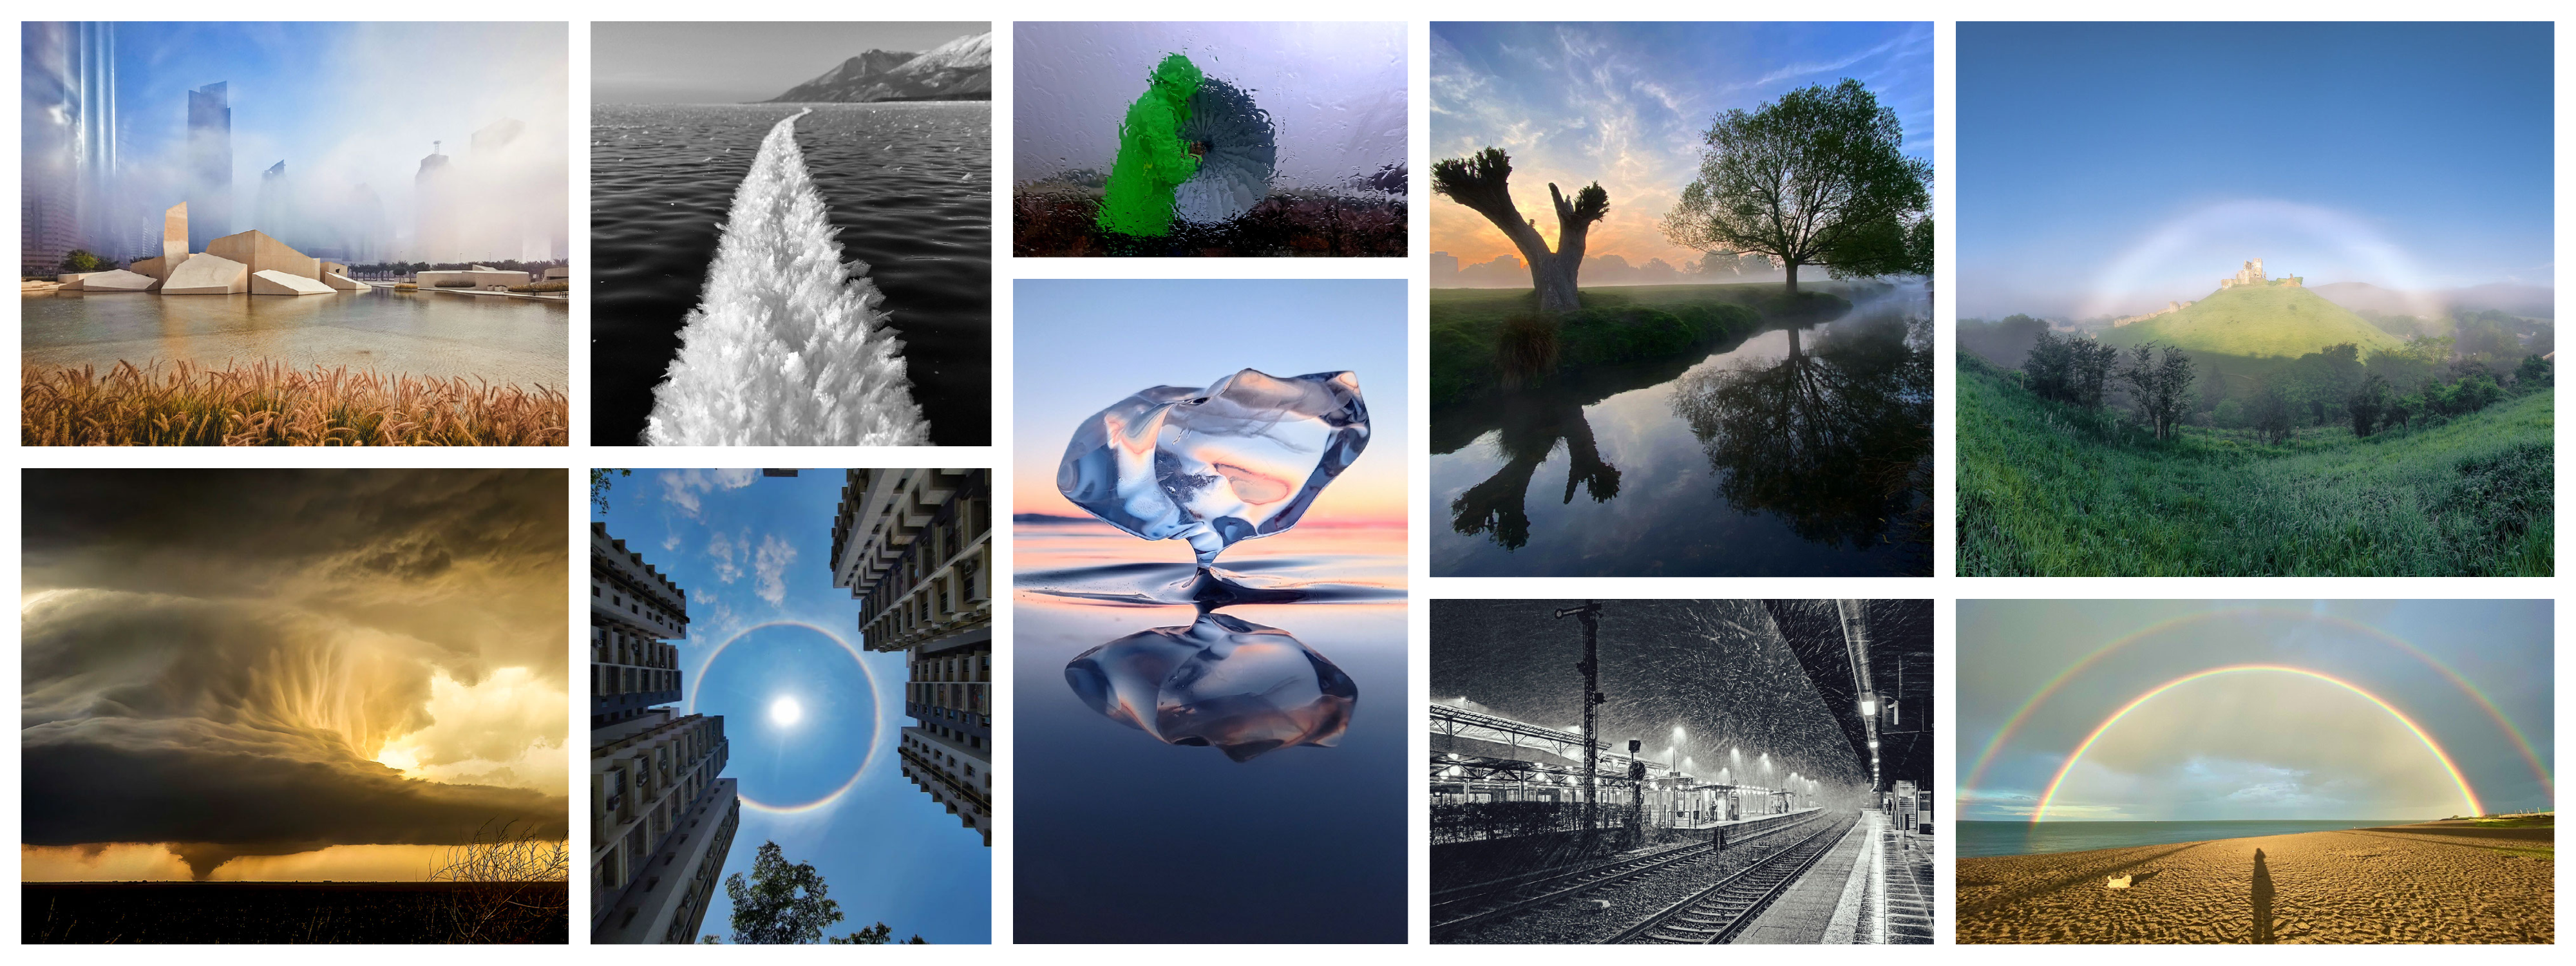 The Top 10 Images in the Mobile Category of the Royal Meteorological Society Weather Photographer of the Year 2021